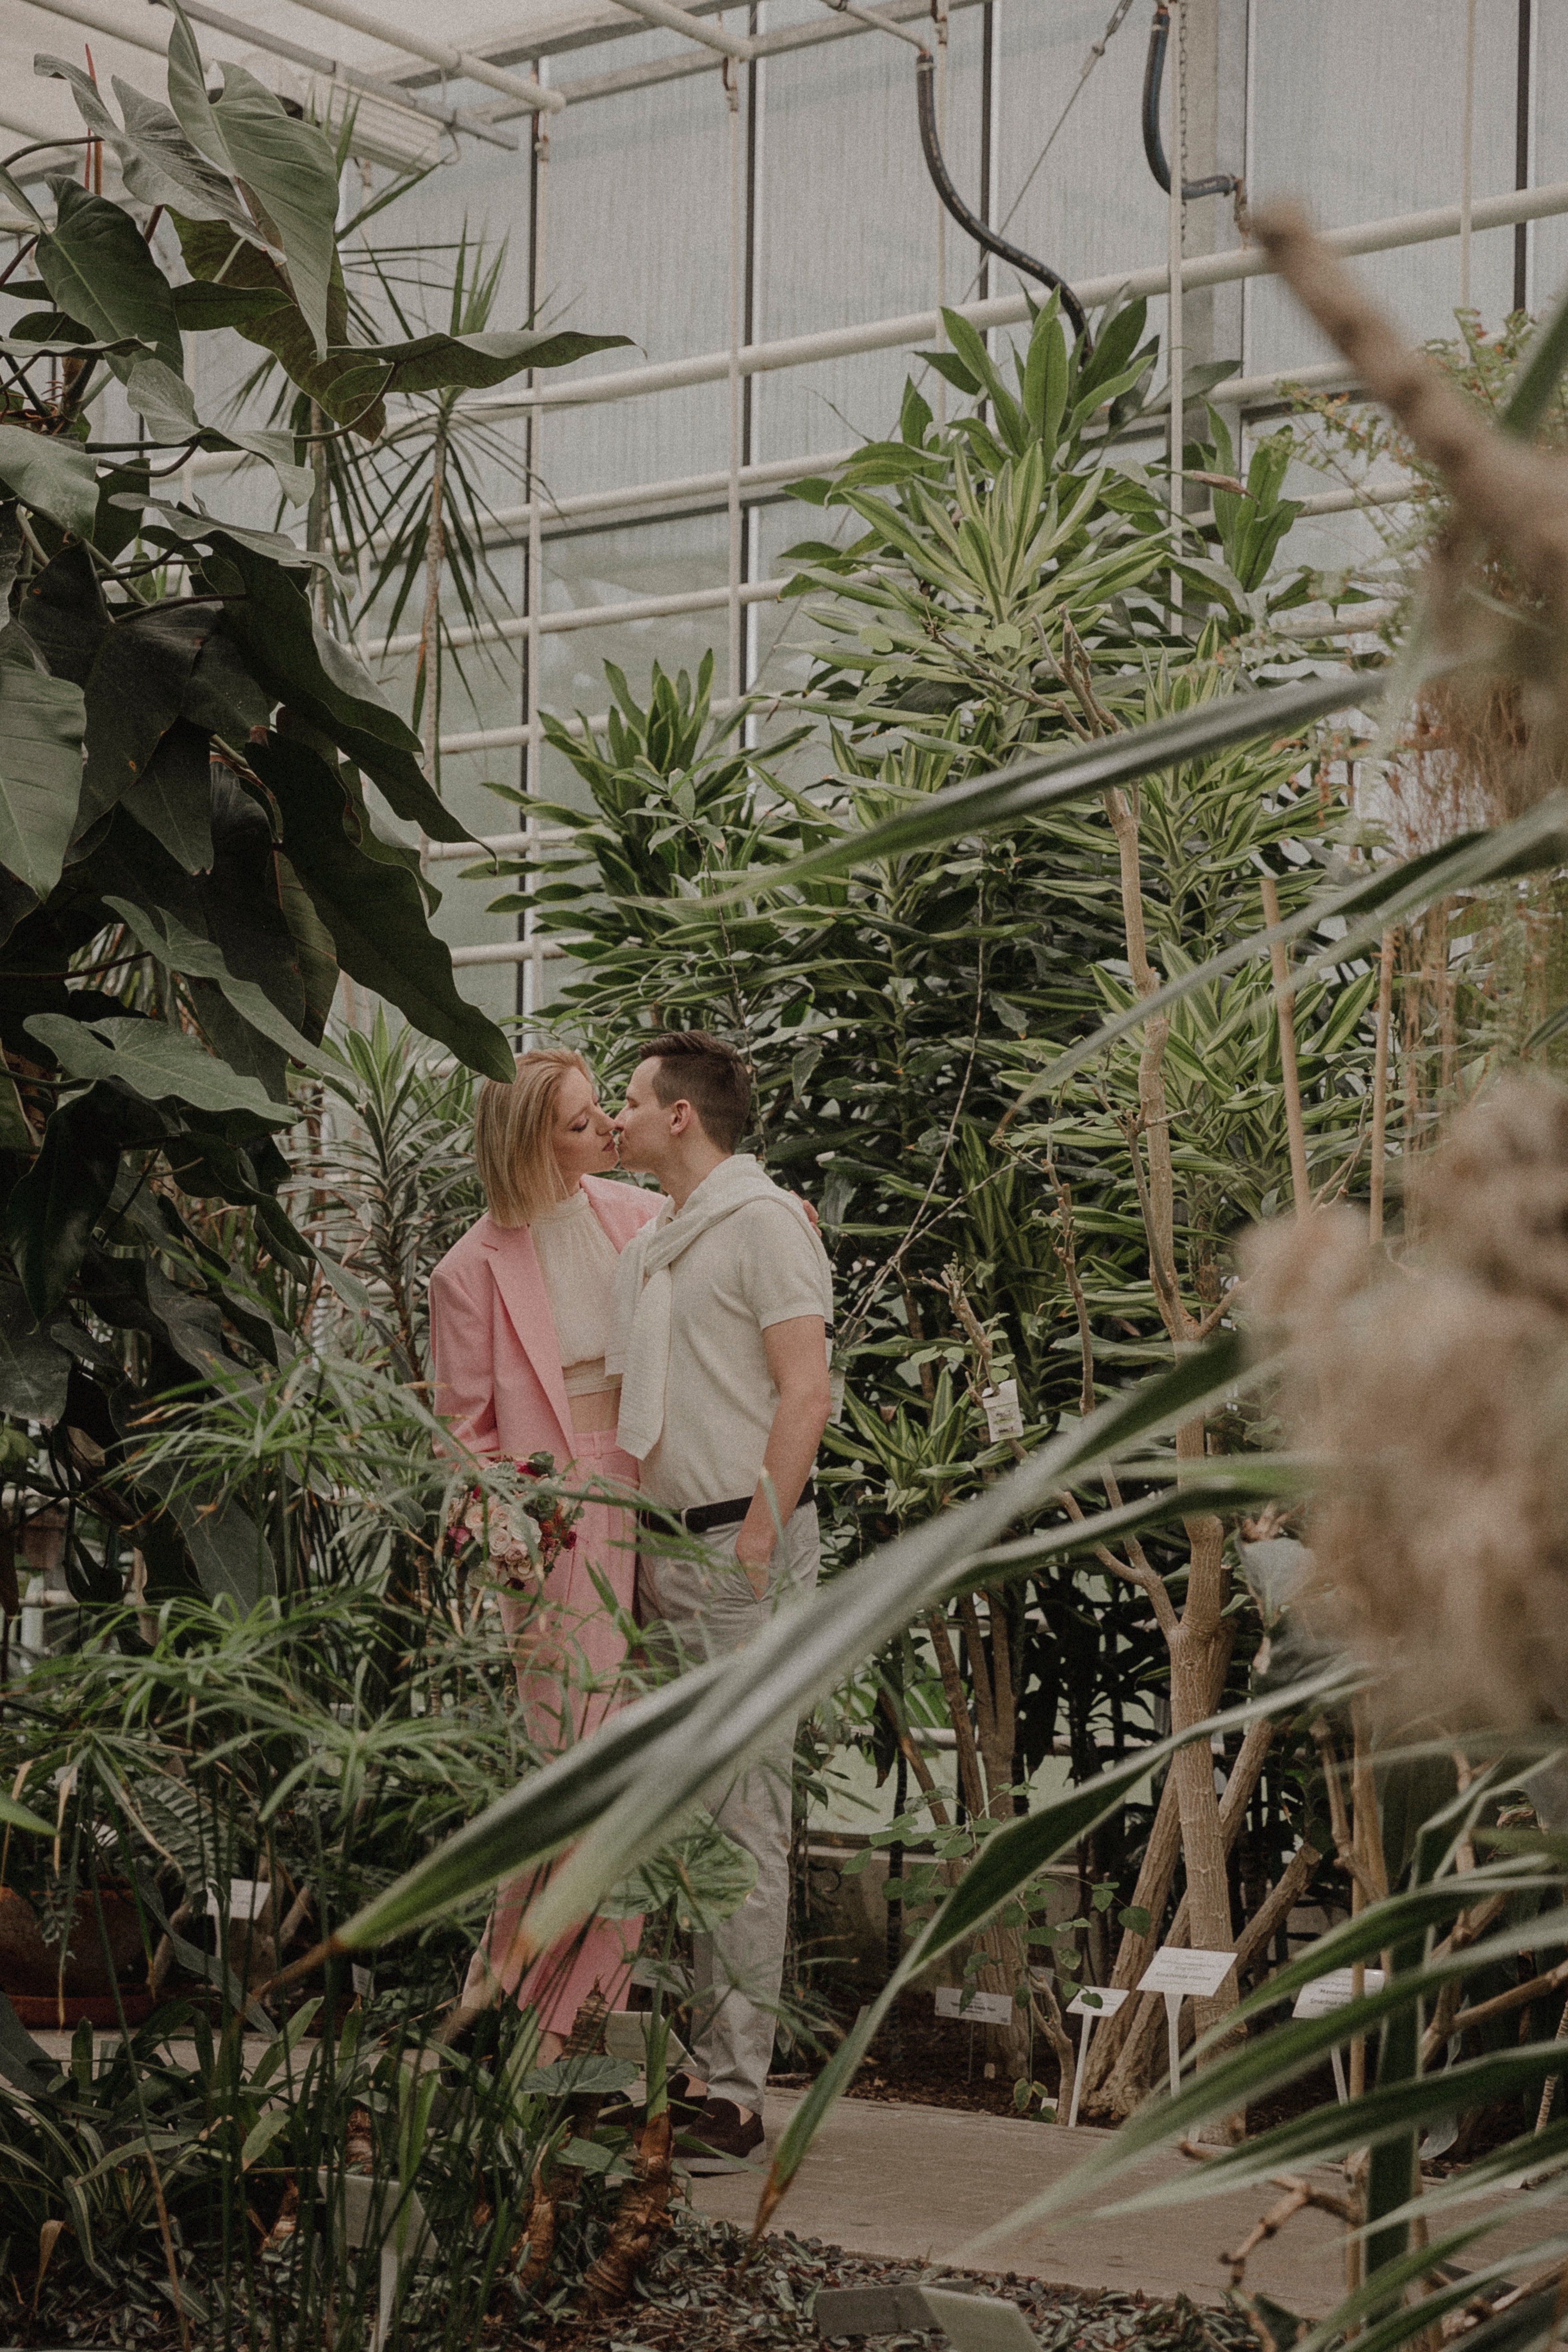 A couple kissing in a greenhouse. | Source: Pexels